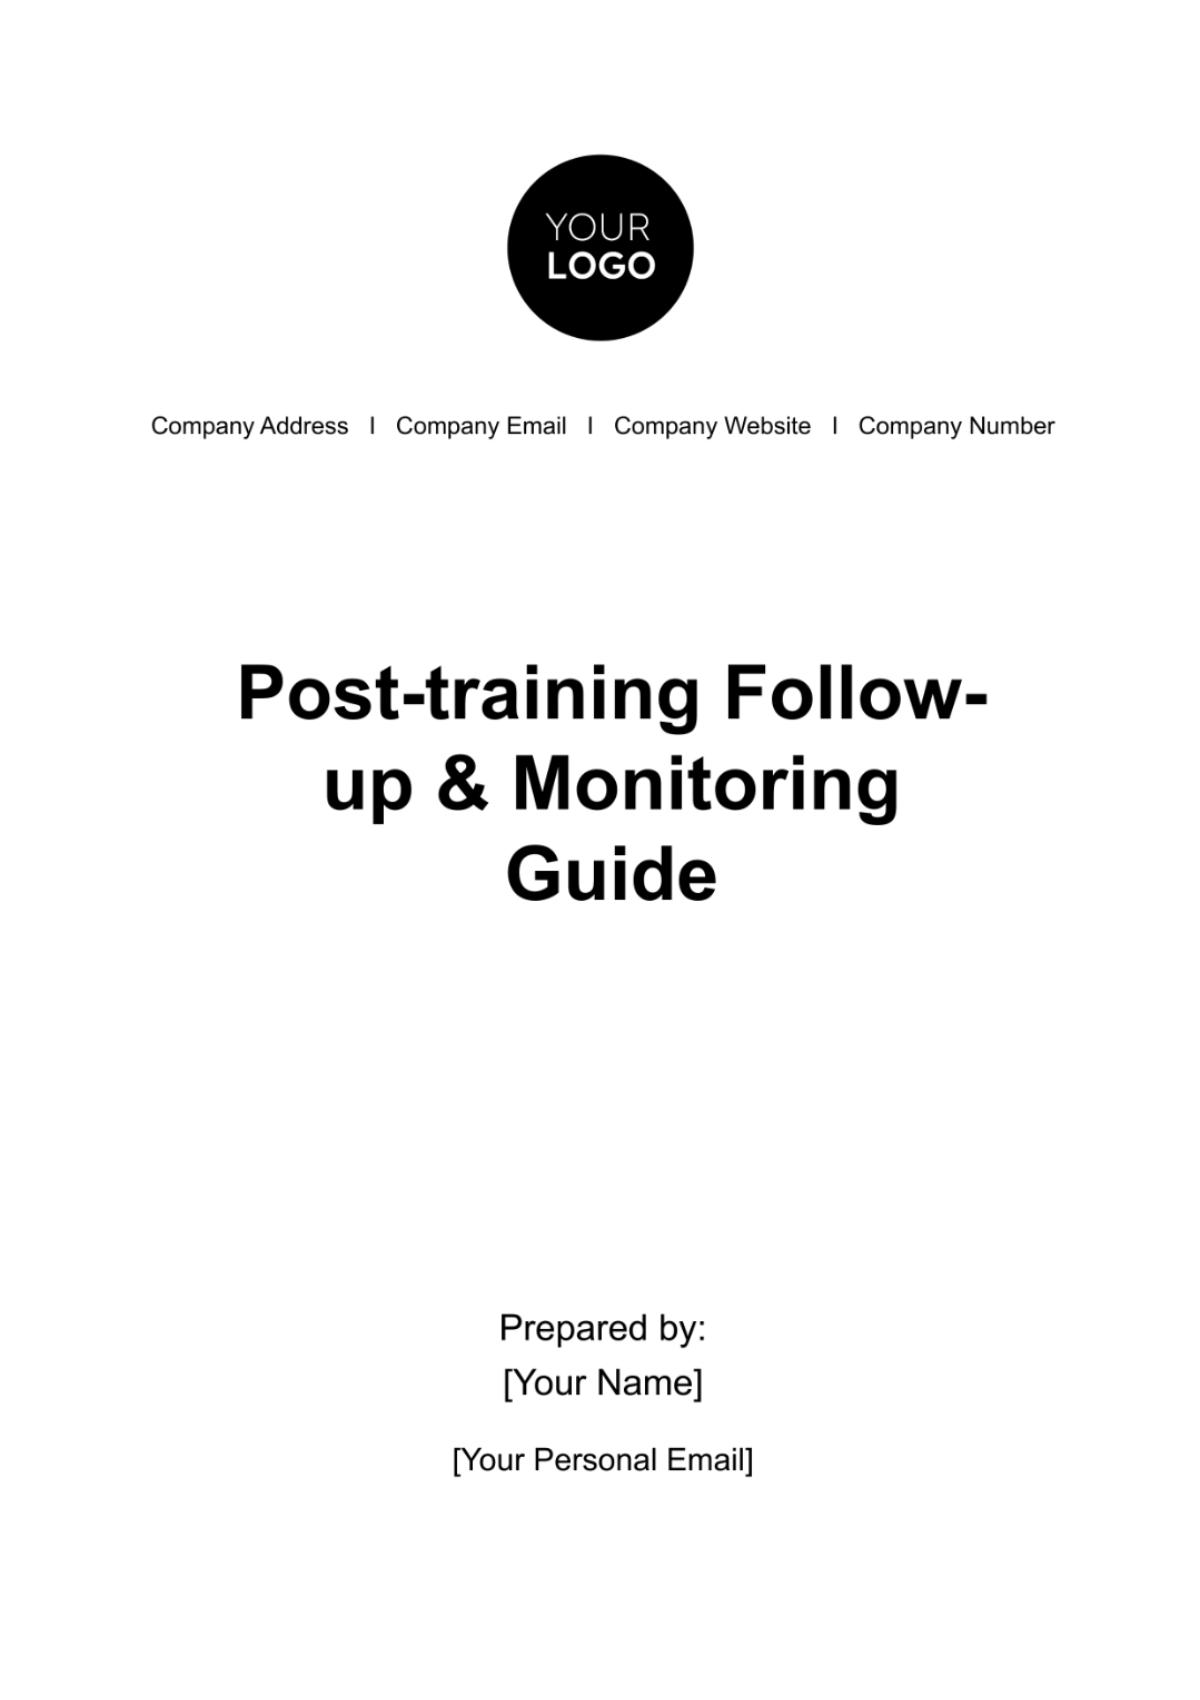 Post-training Follow-up & Monitoring Guide HR Template